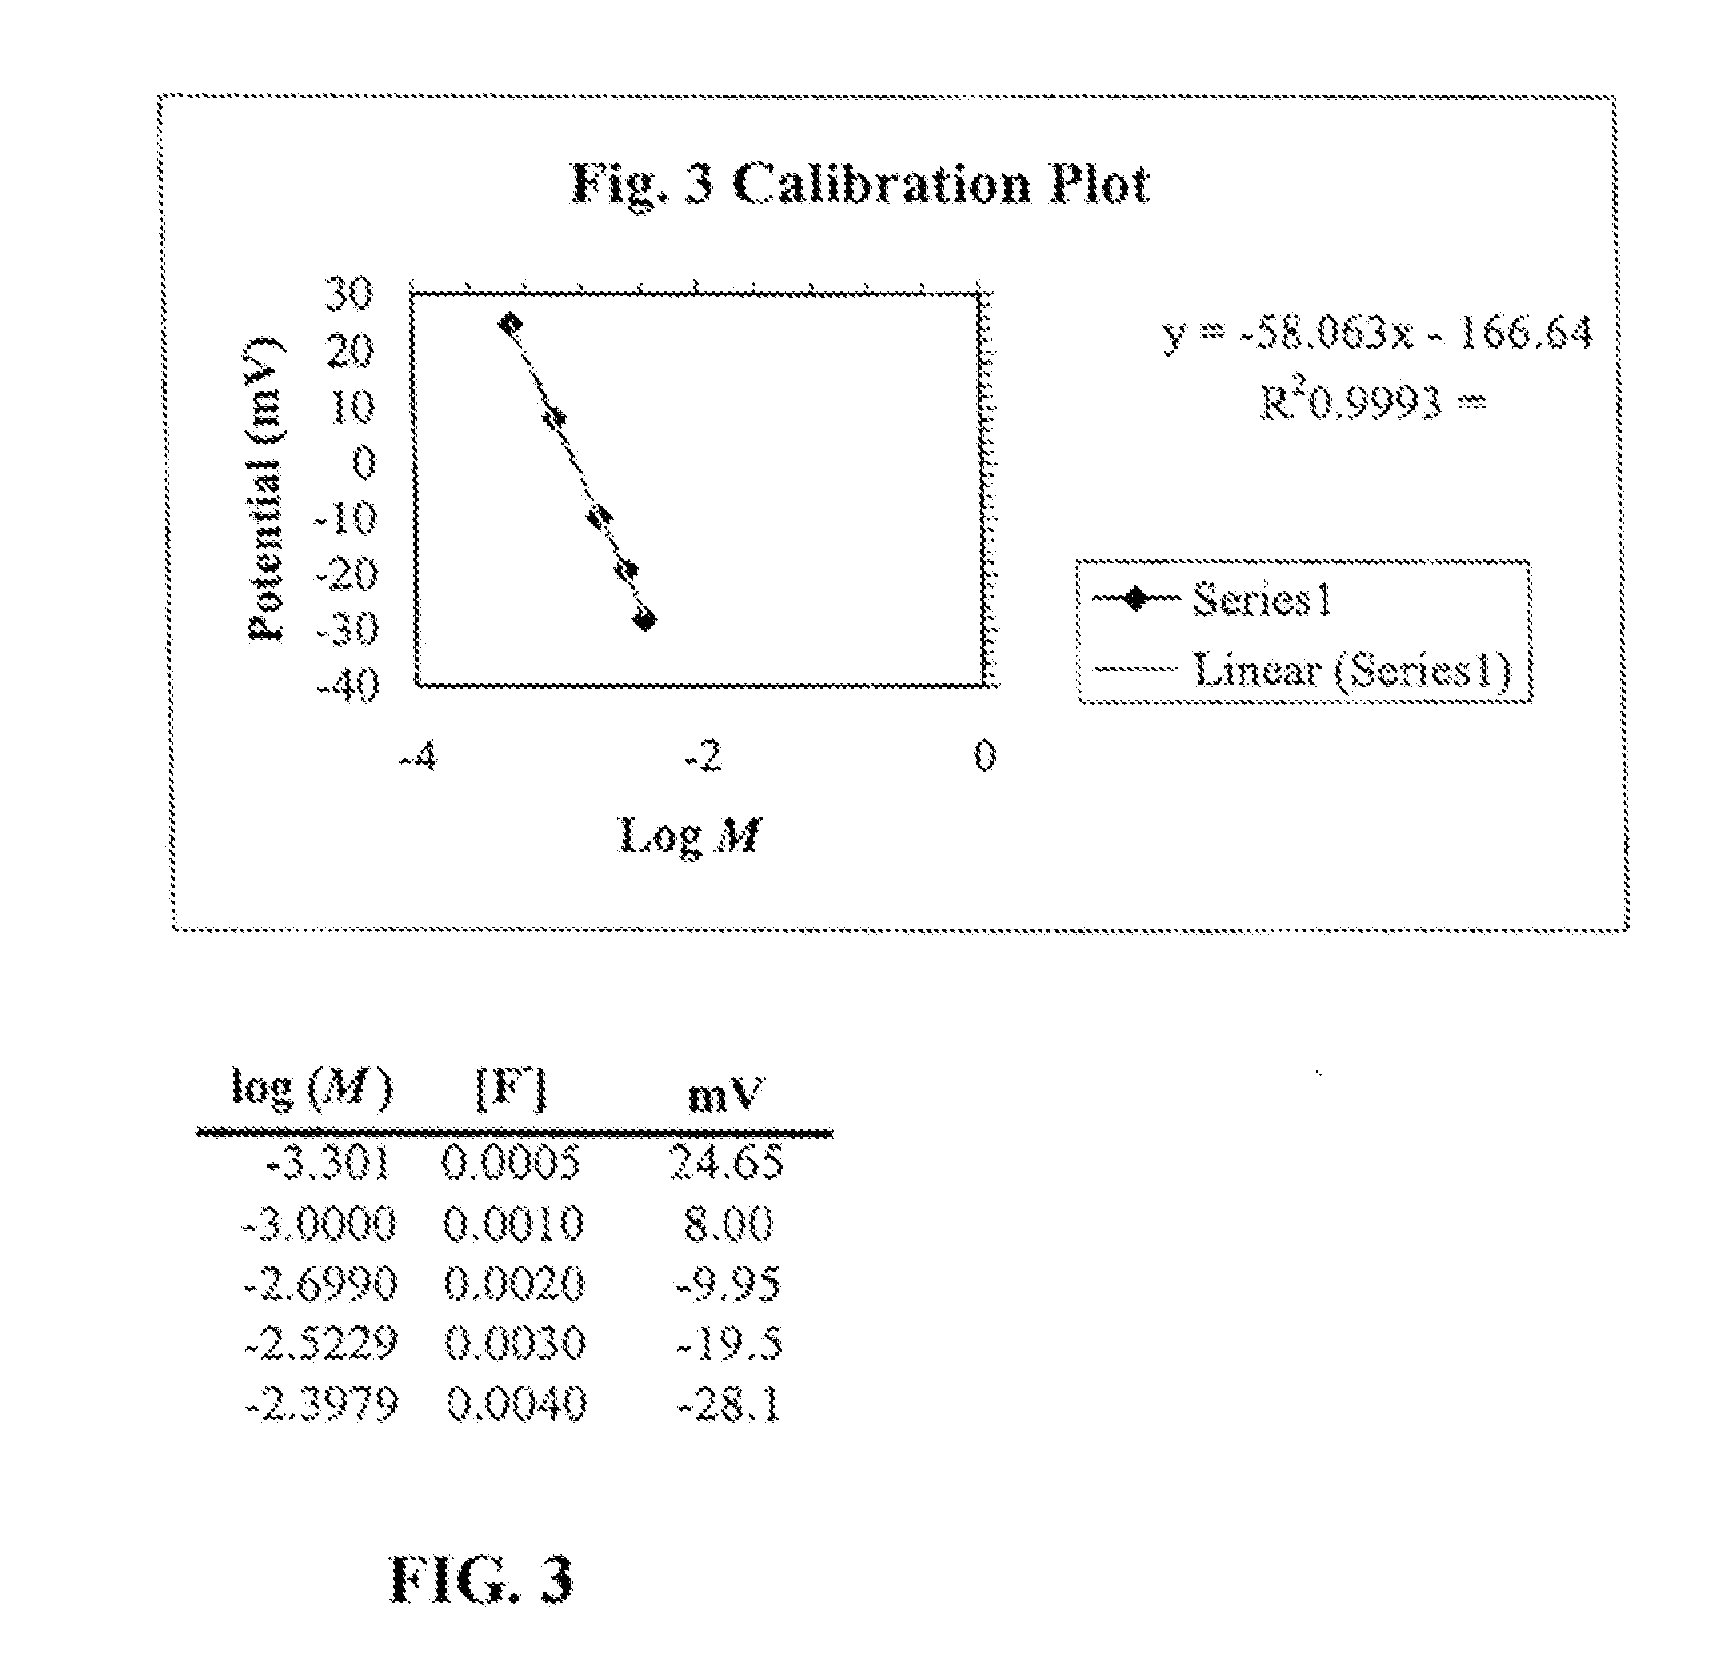 Method of Measuring Fluoride in Fluxes Using the Fluoride Ion-Selective Electrode